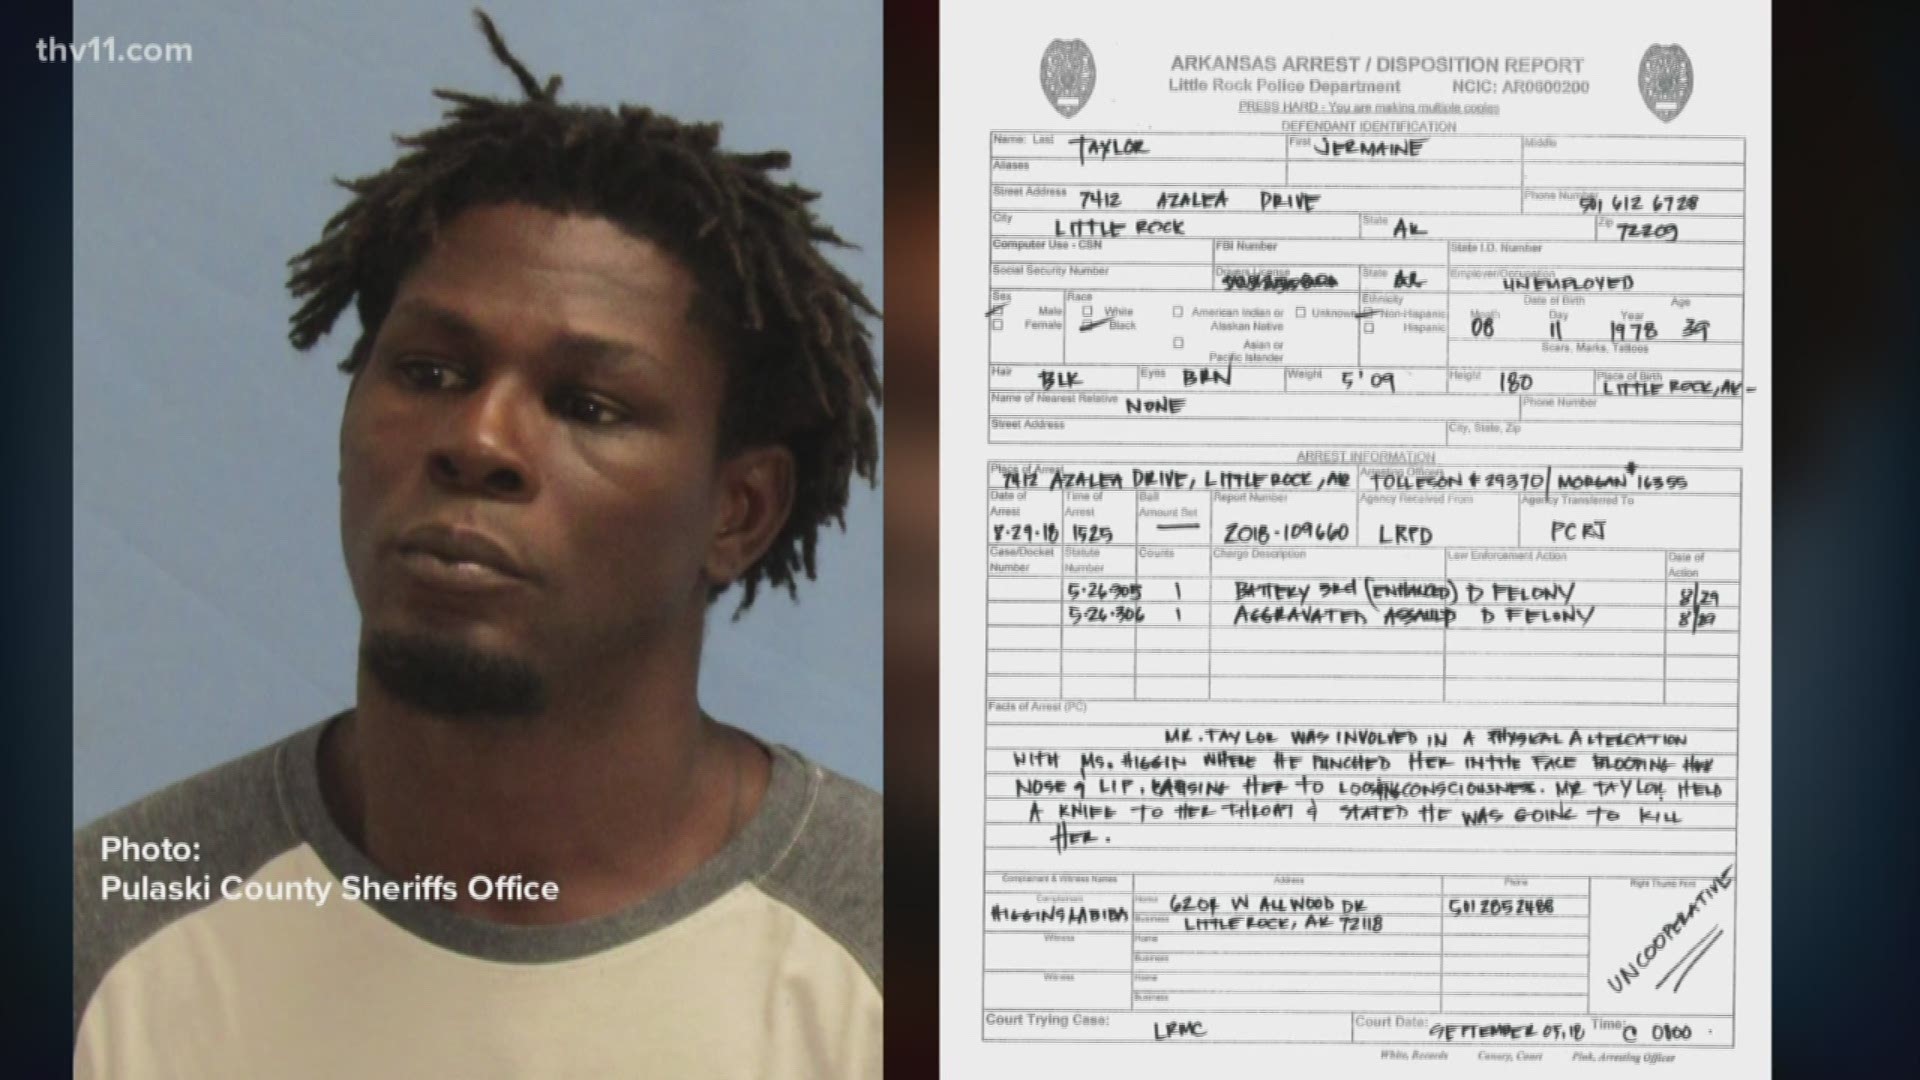 Former middleweight boxing champion Jermain Taylor was arrested today.